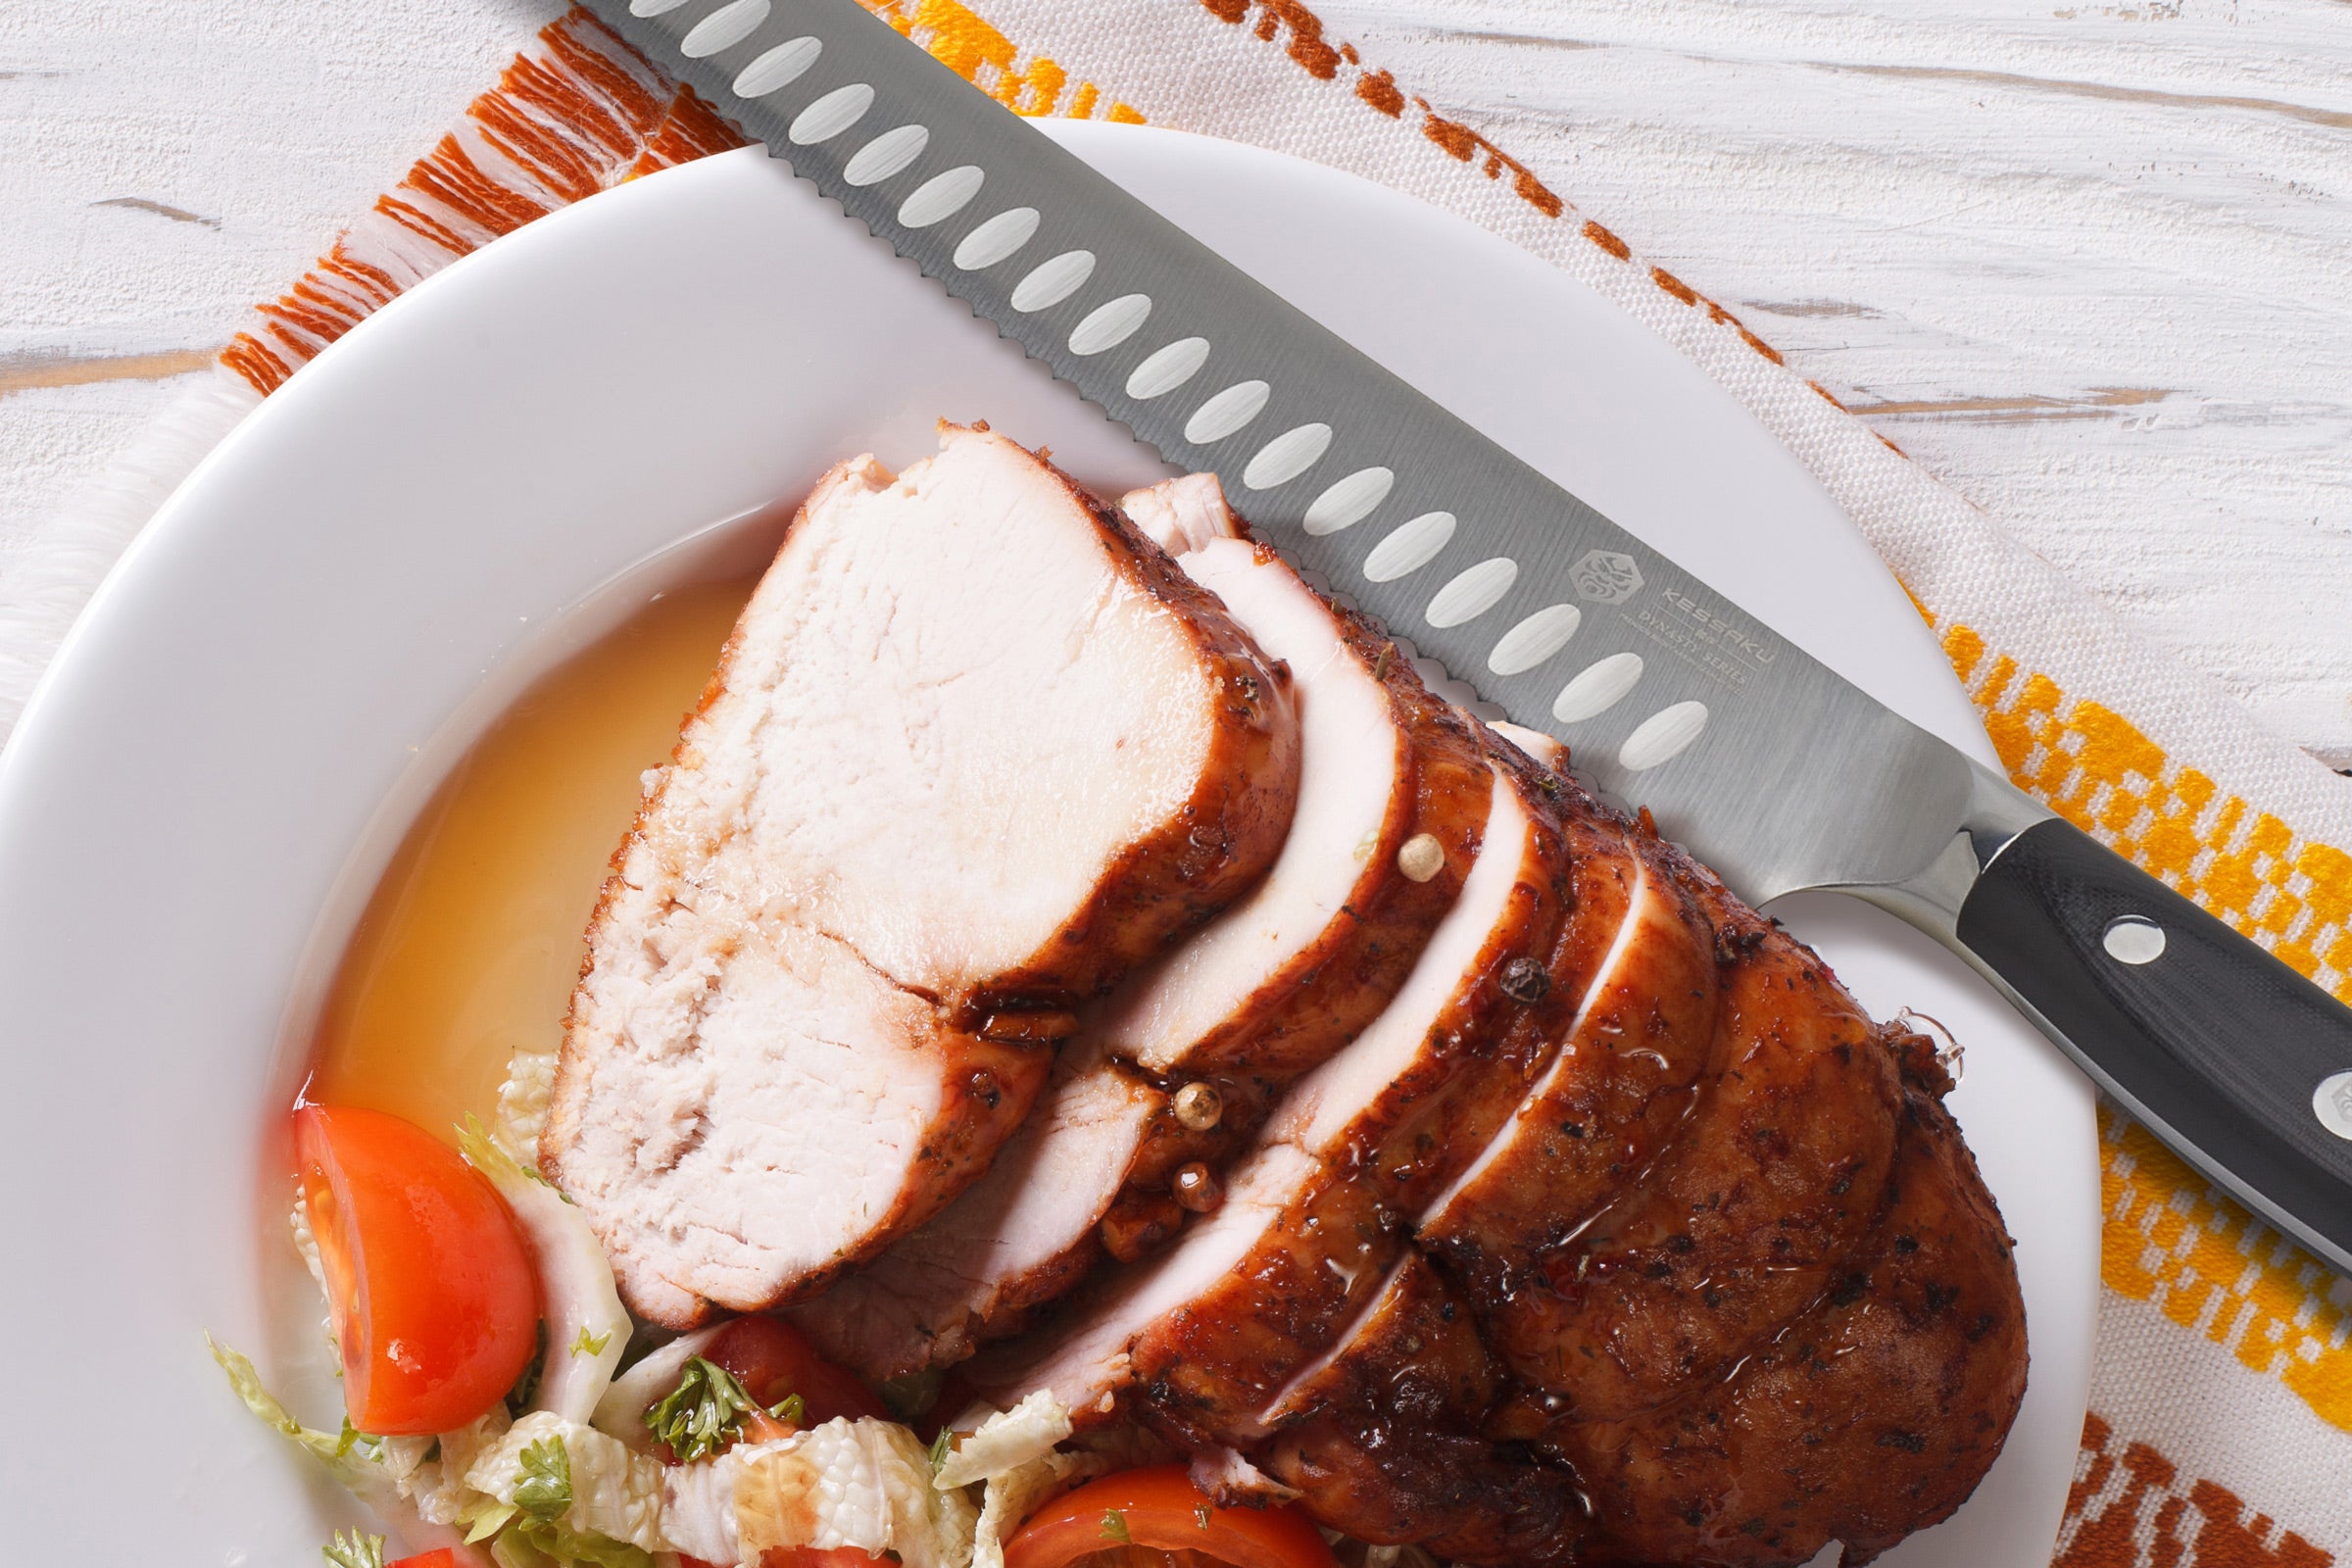 The Dynasty Serrated Carving Knife next to a plate of thick, sliced chicken.